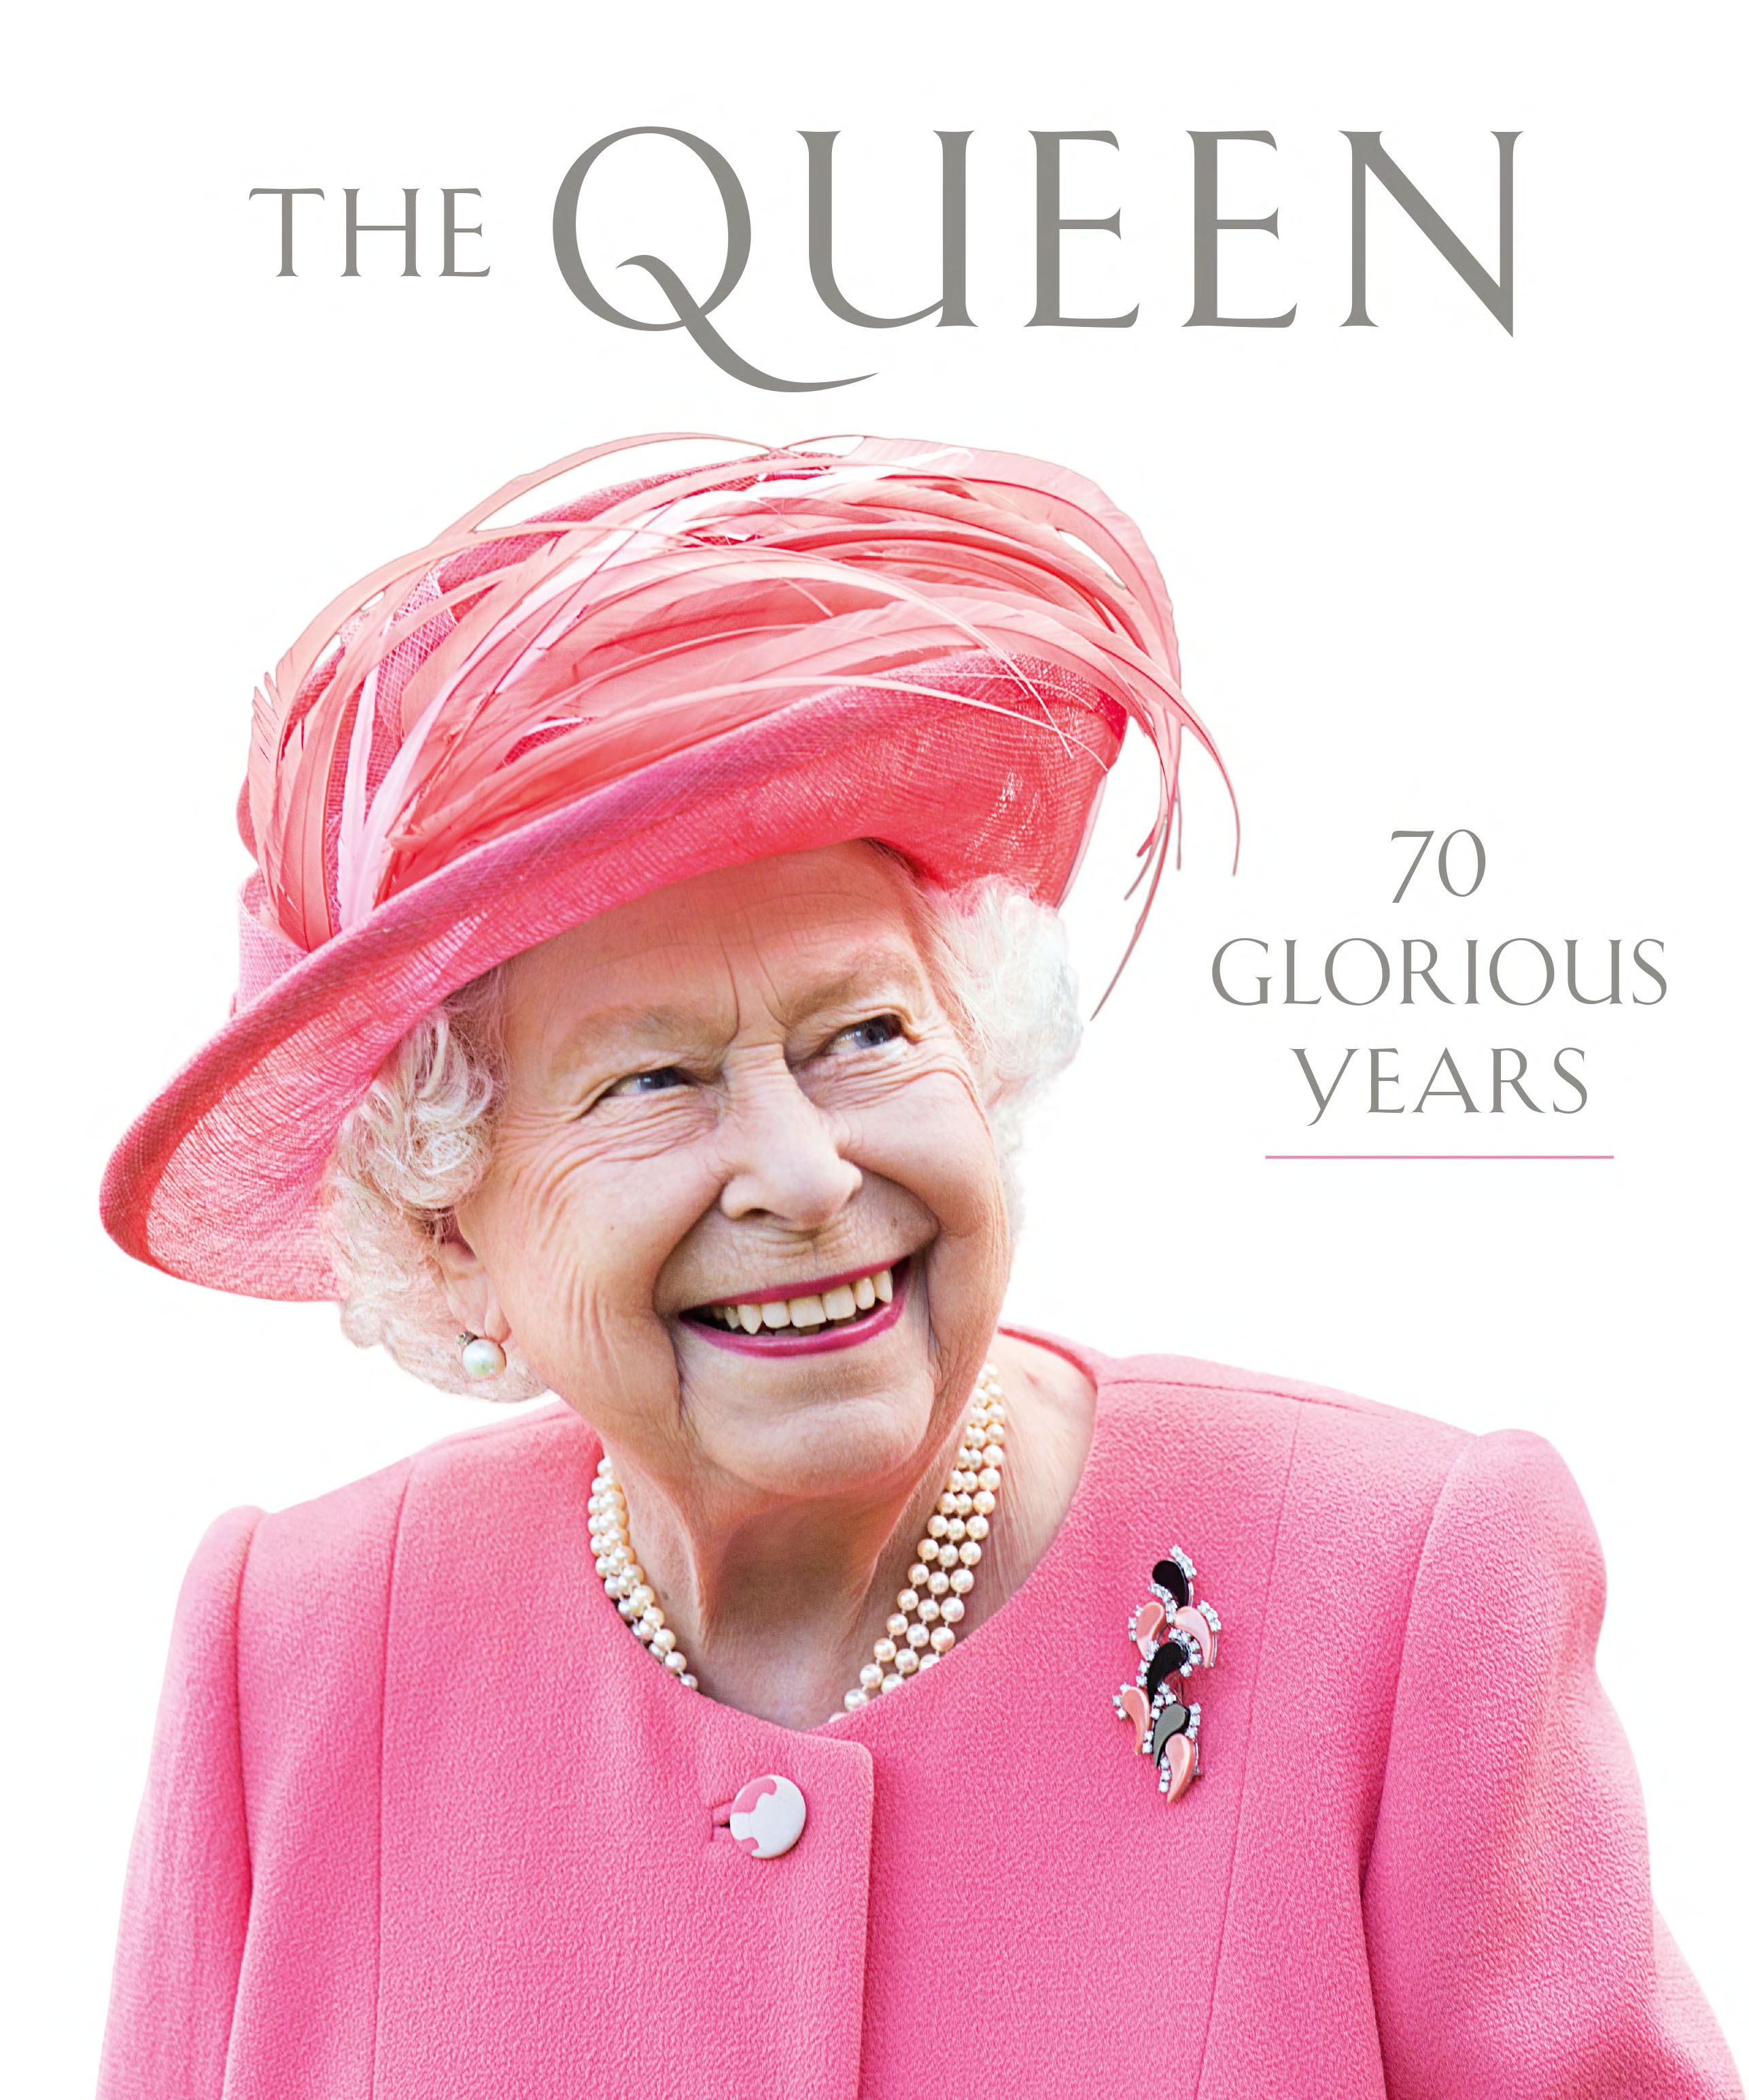 Book jacket of The Queen: 70 Glorious Years (Royal Collection Trust/Her Majesty Queen Elizabeth II/PA)